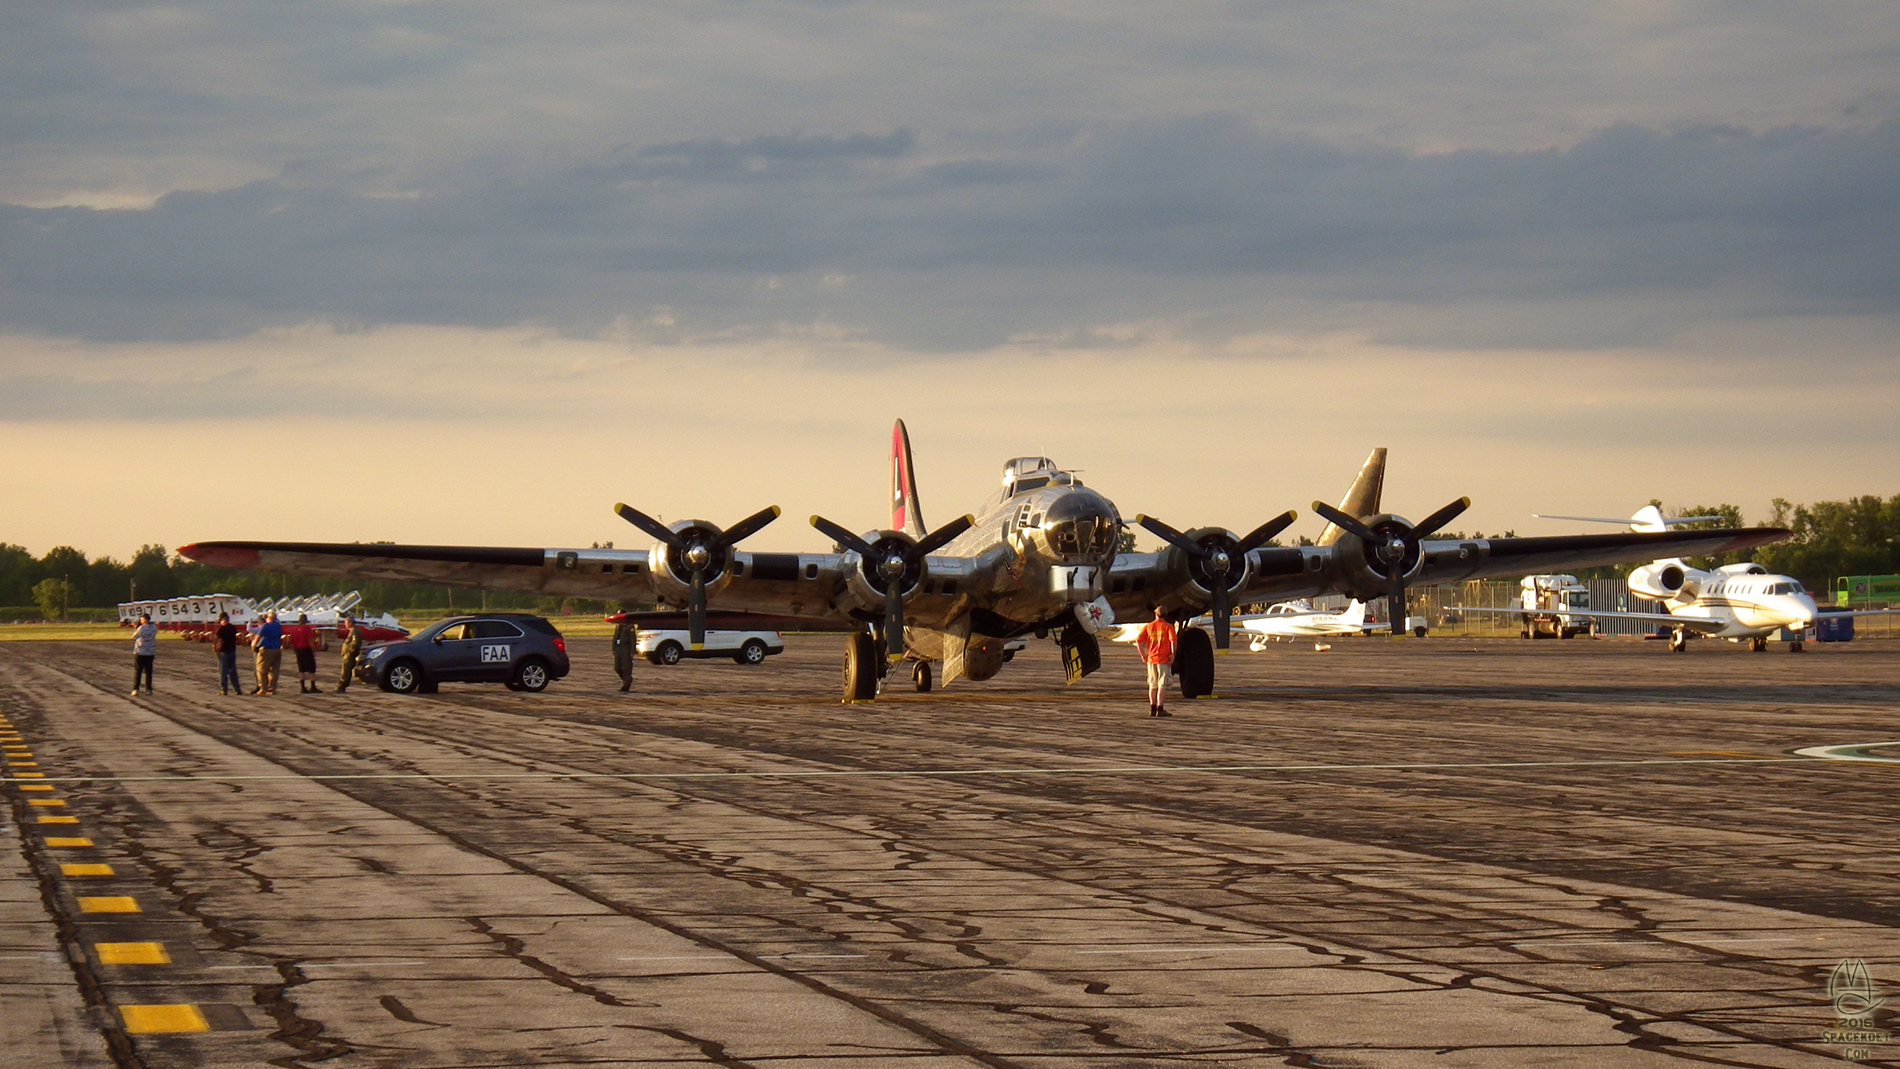 B-17 and Snowbirds lined up at sunset. Featuring dot gov shot spoilers. 